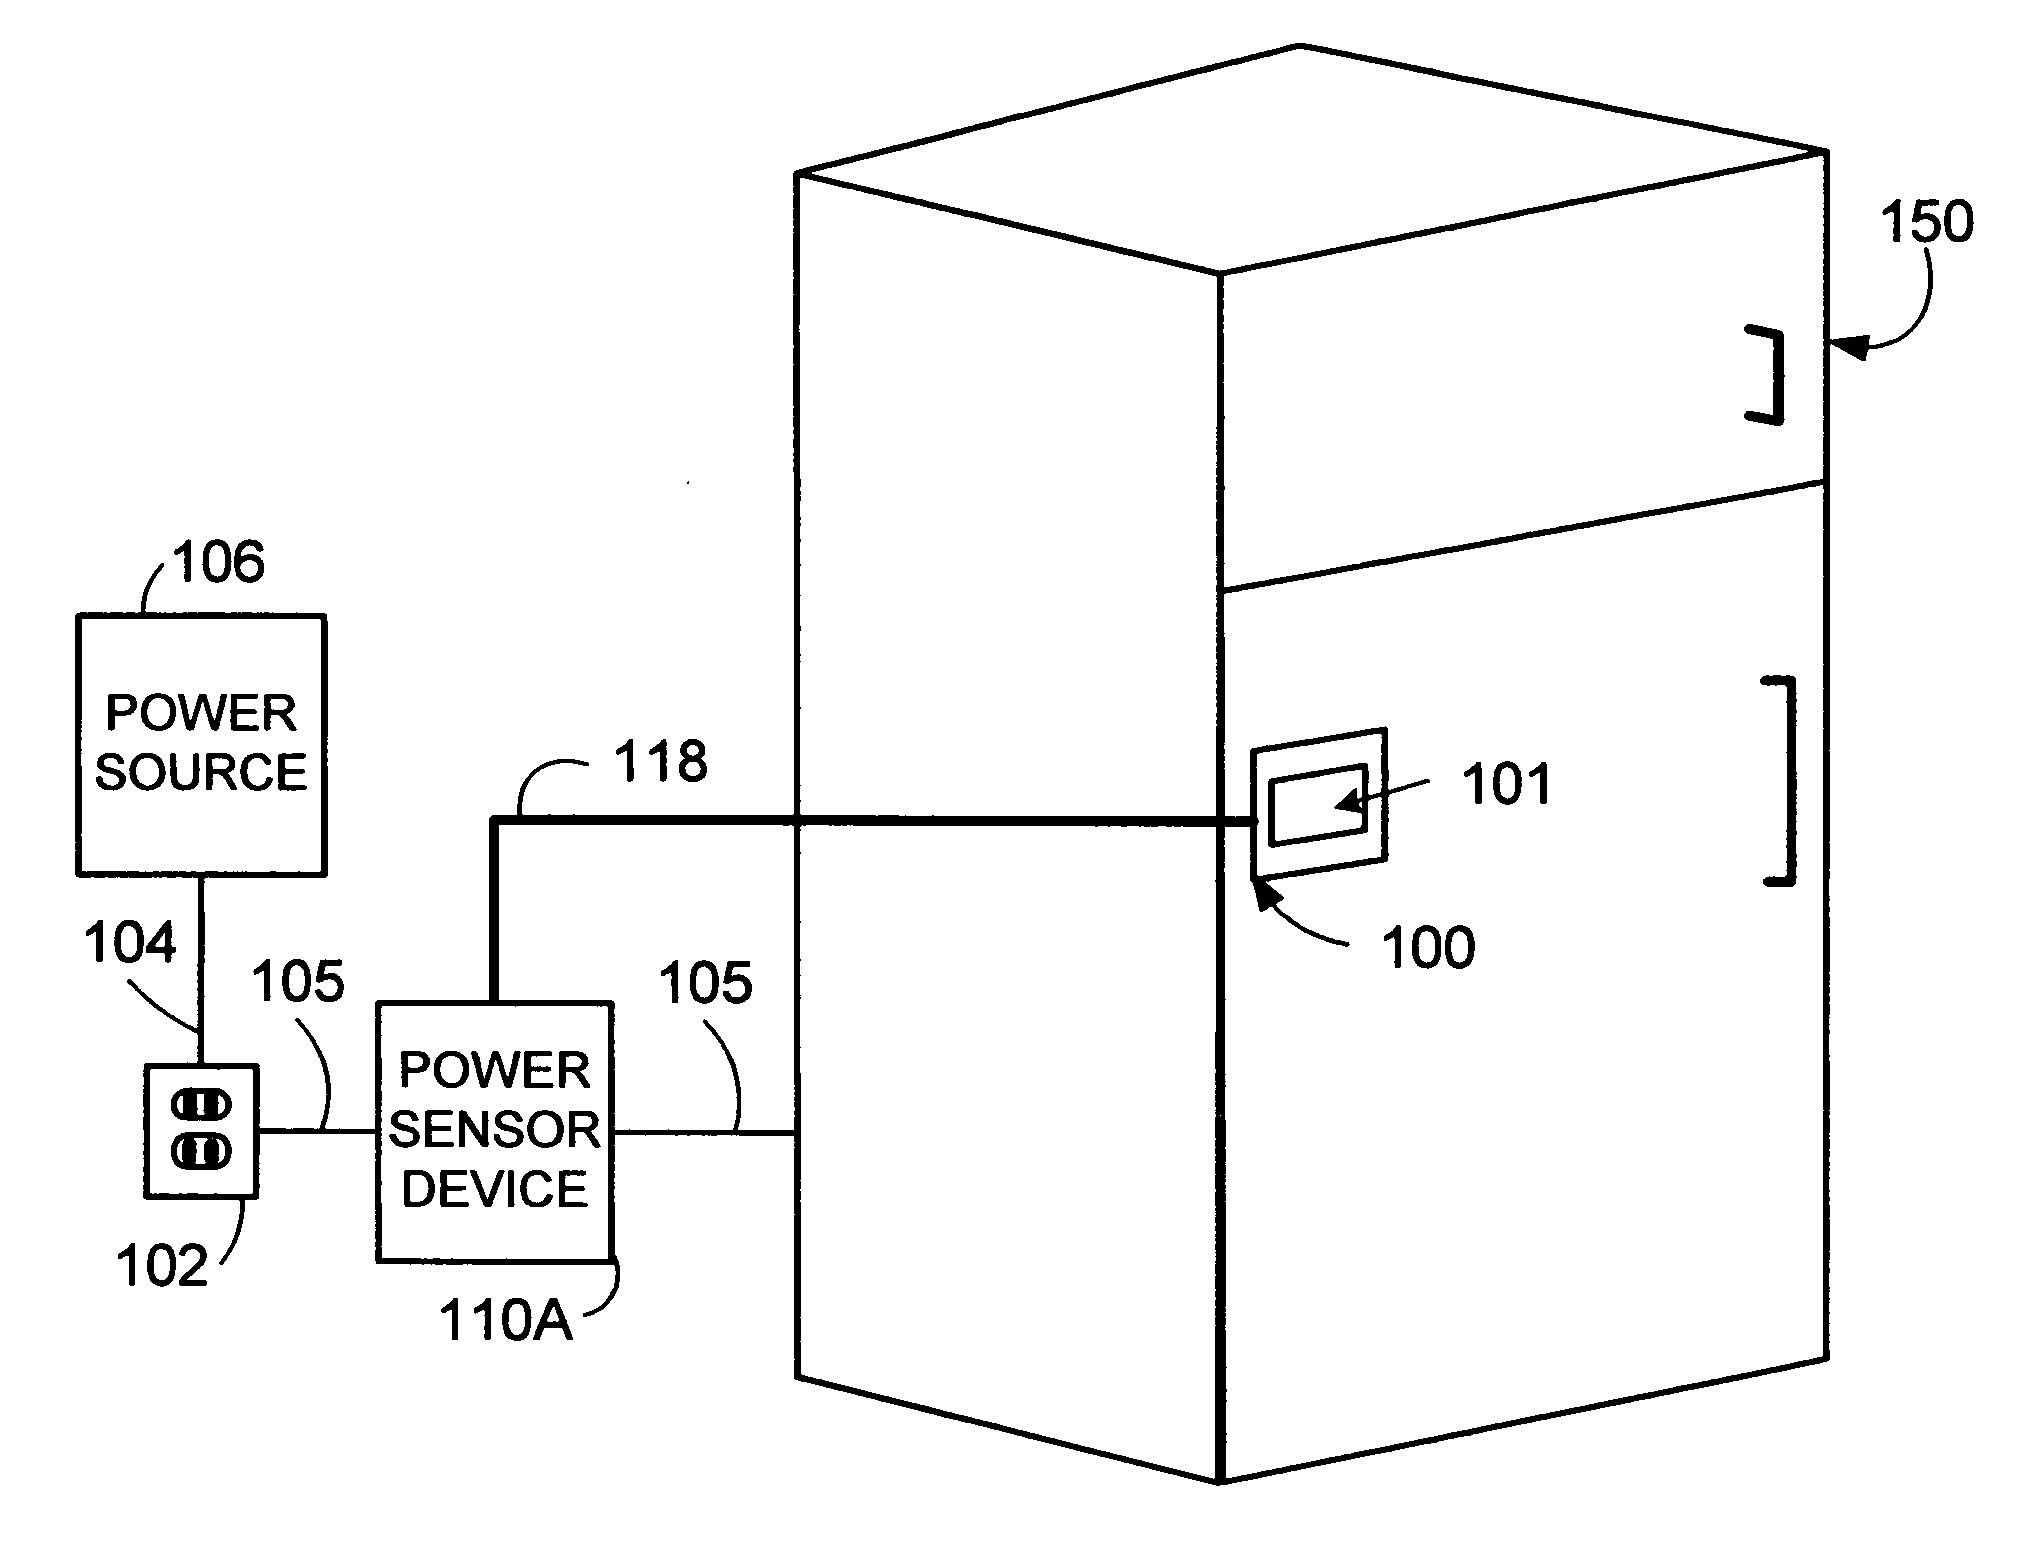 Apparatus and method for monitoring and displaying power usage